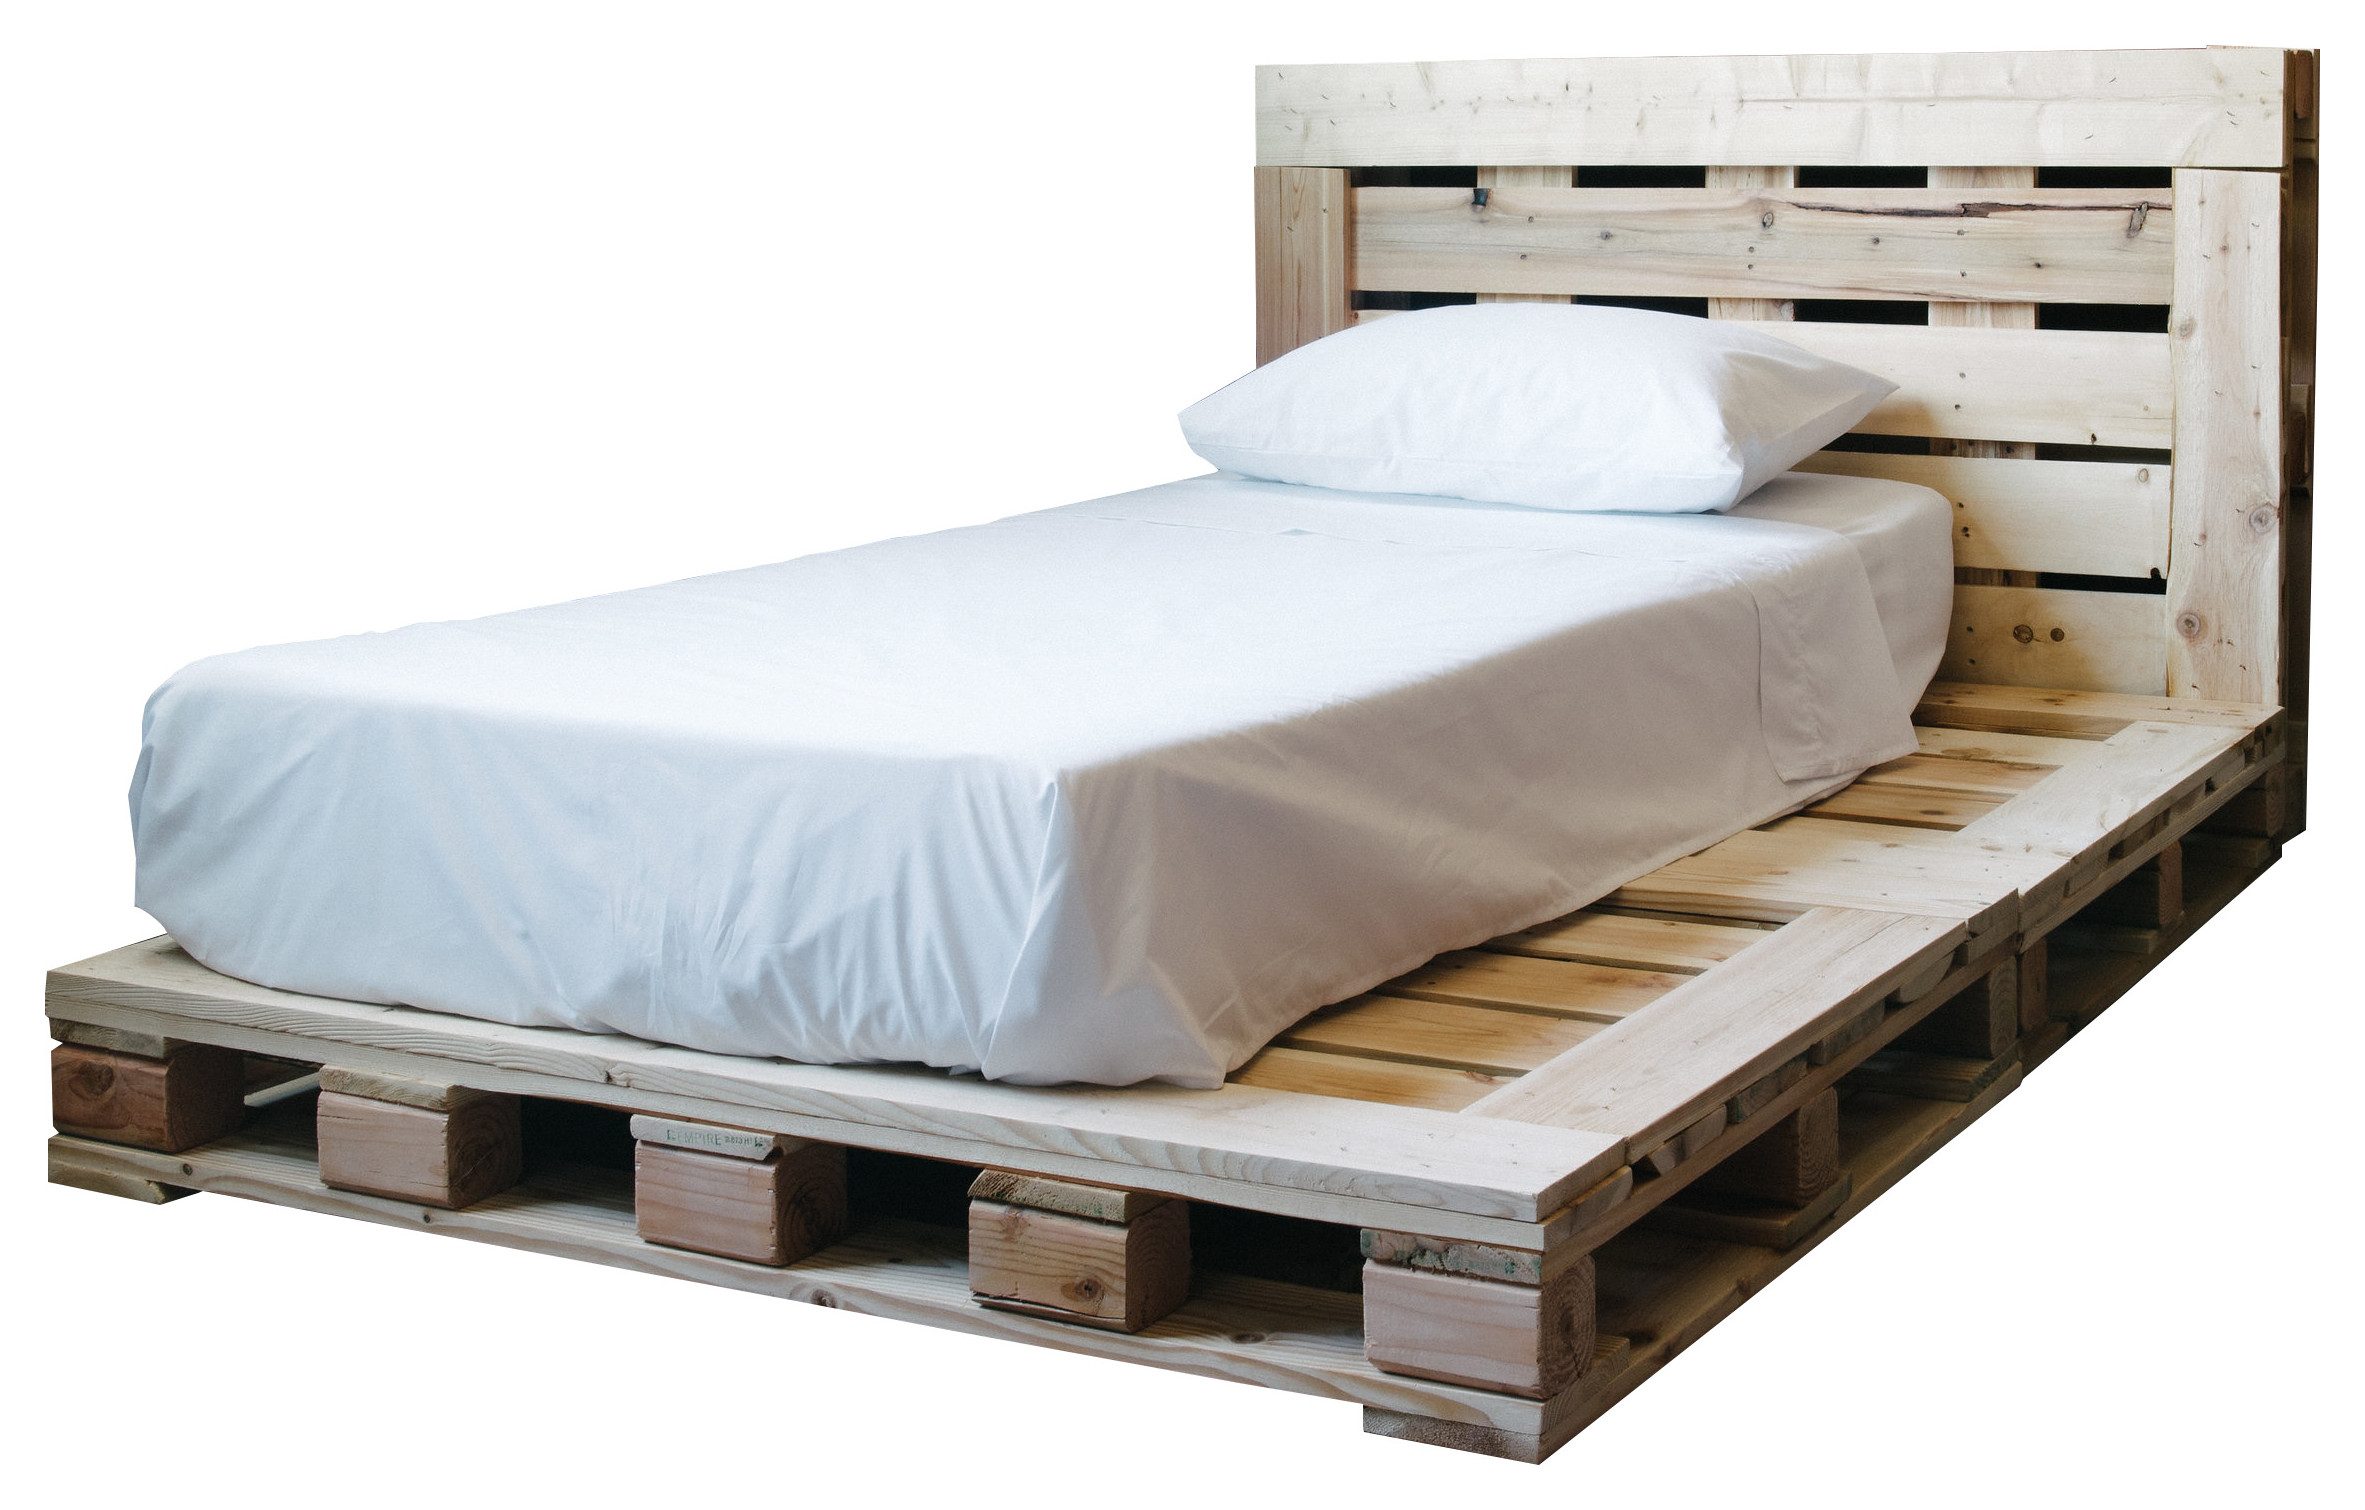 Industrial Bedroom By Pallet Beds, Twin Pallet Bed